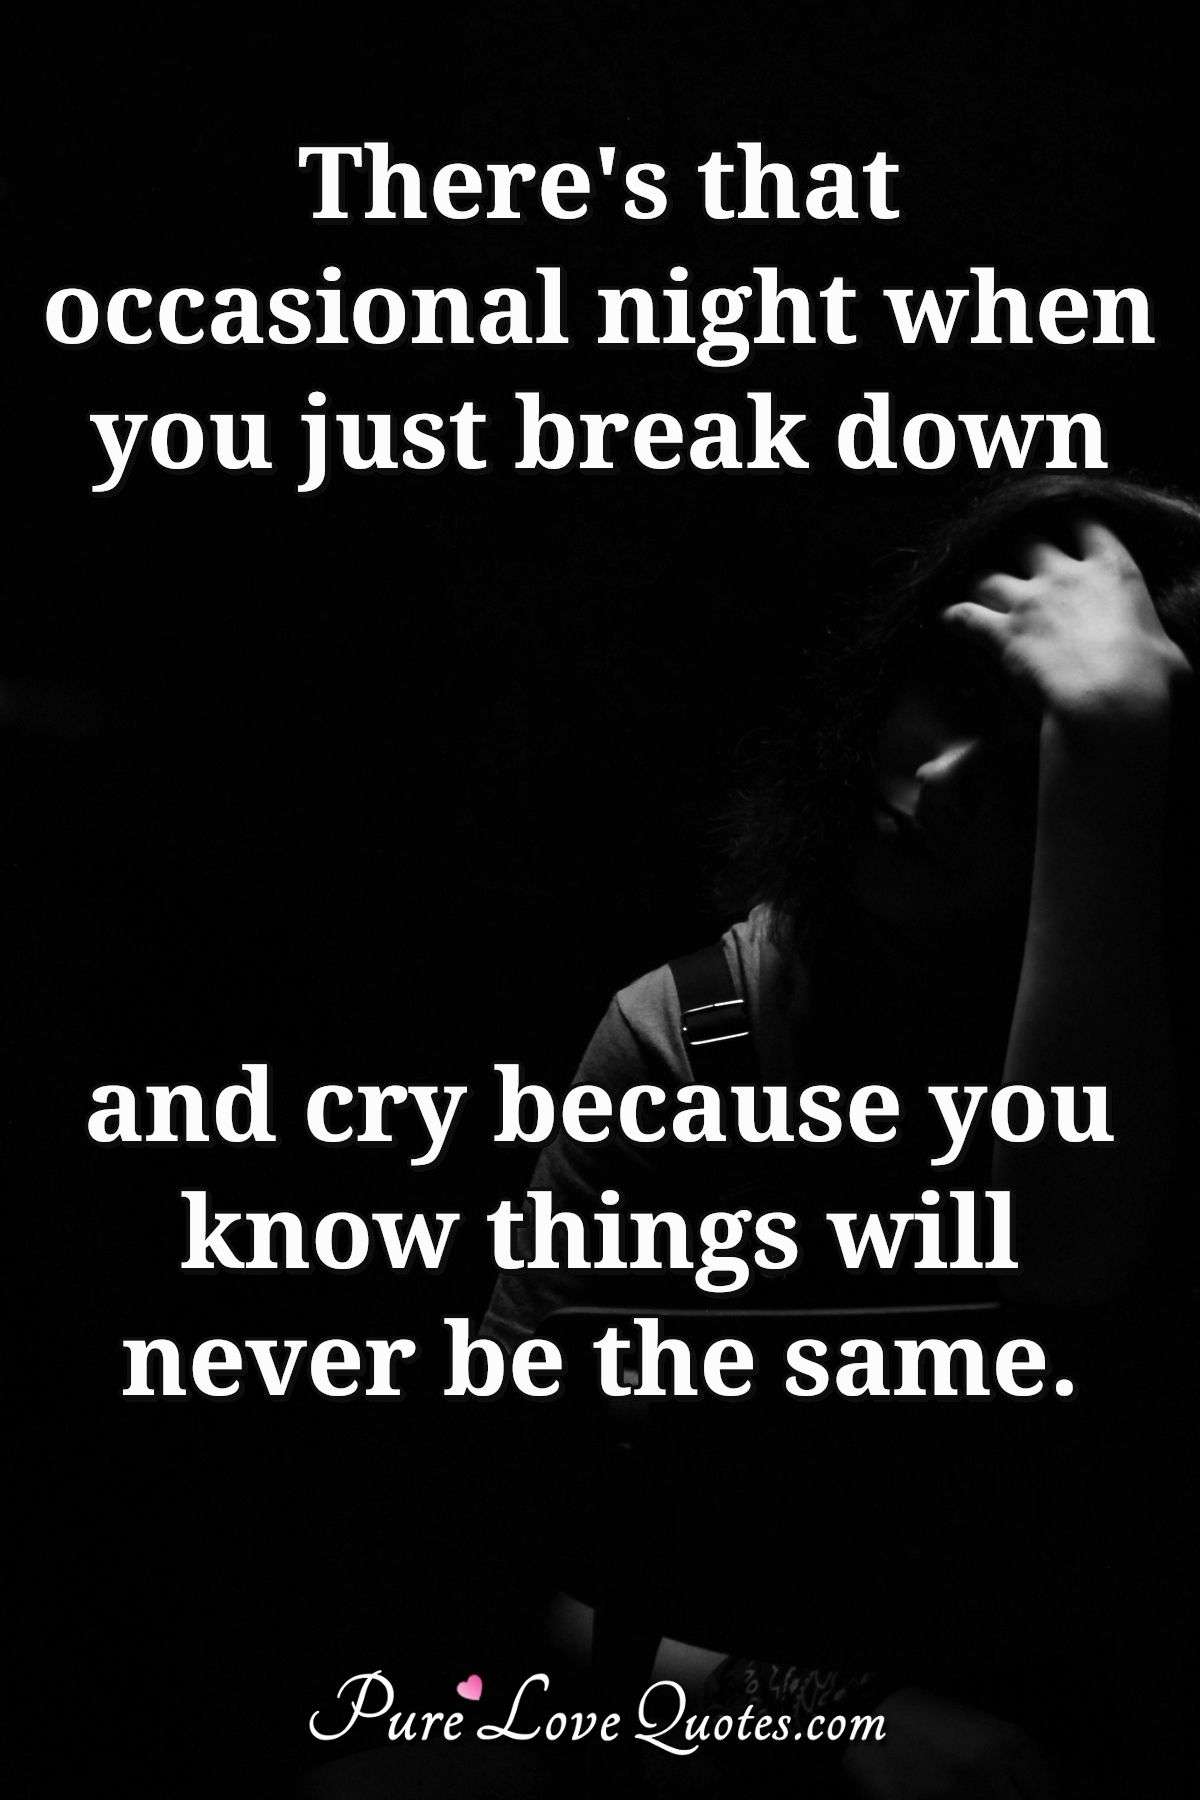 There's that occasional night when you just break down and cry because you know things will never be the same. - Anonymous